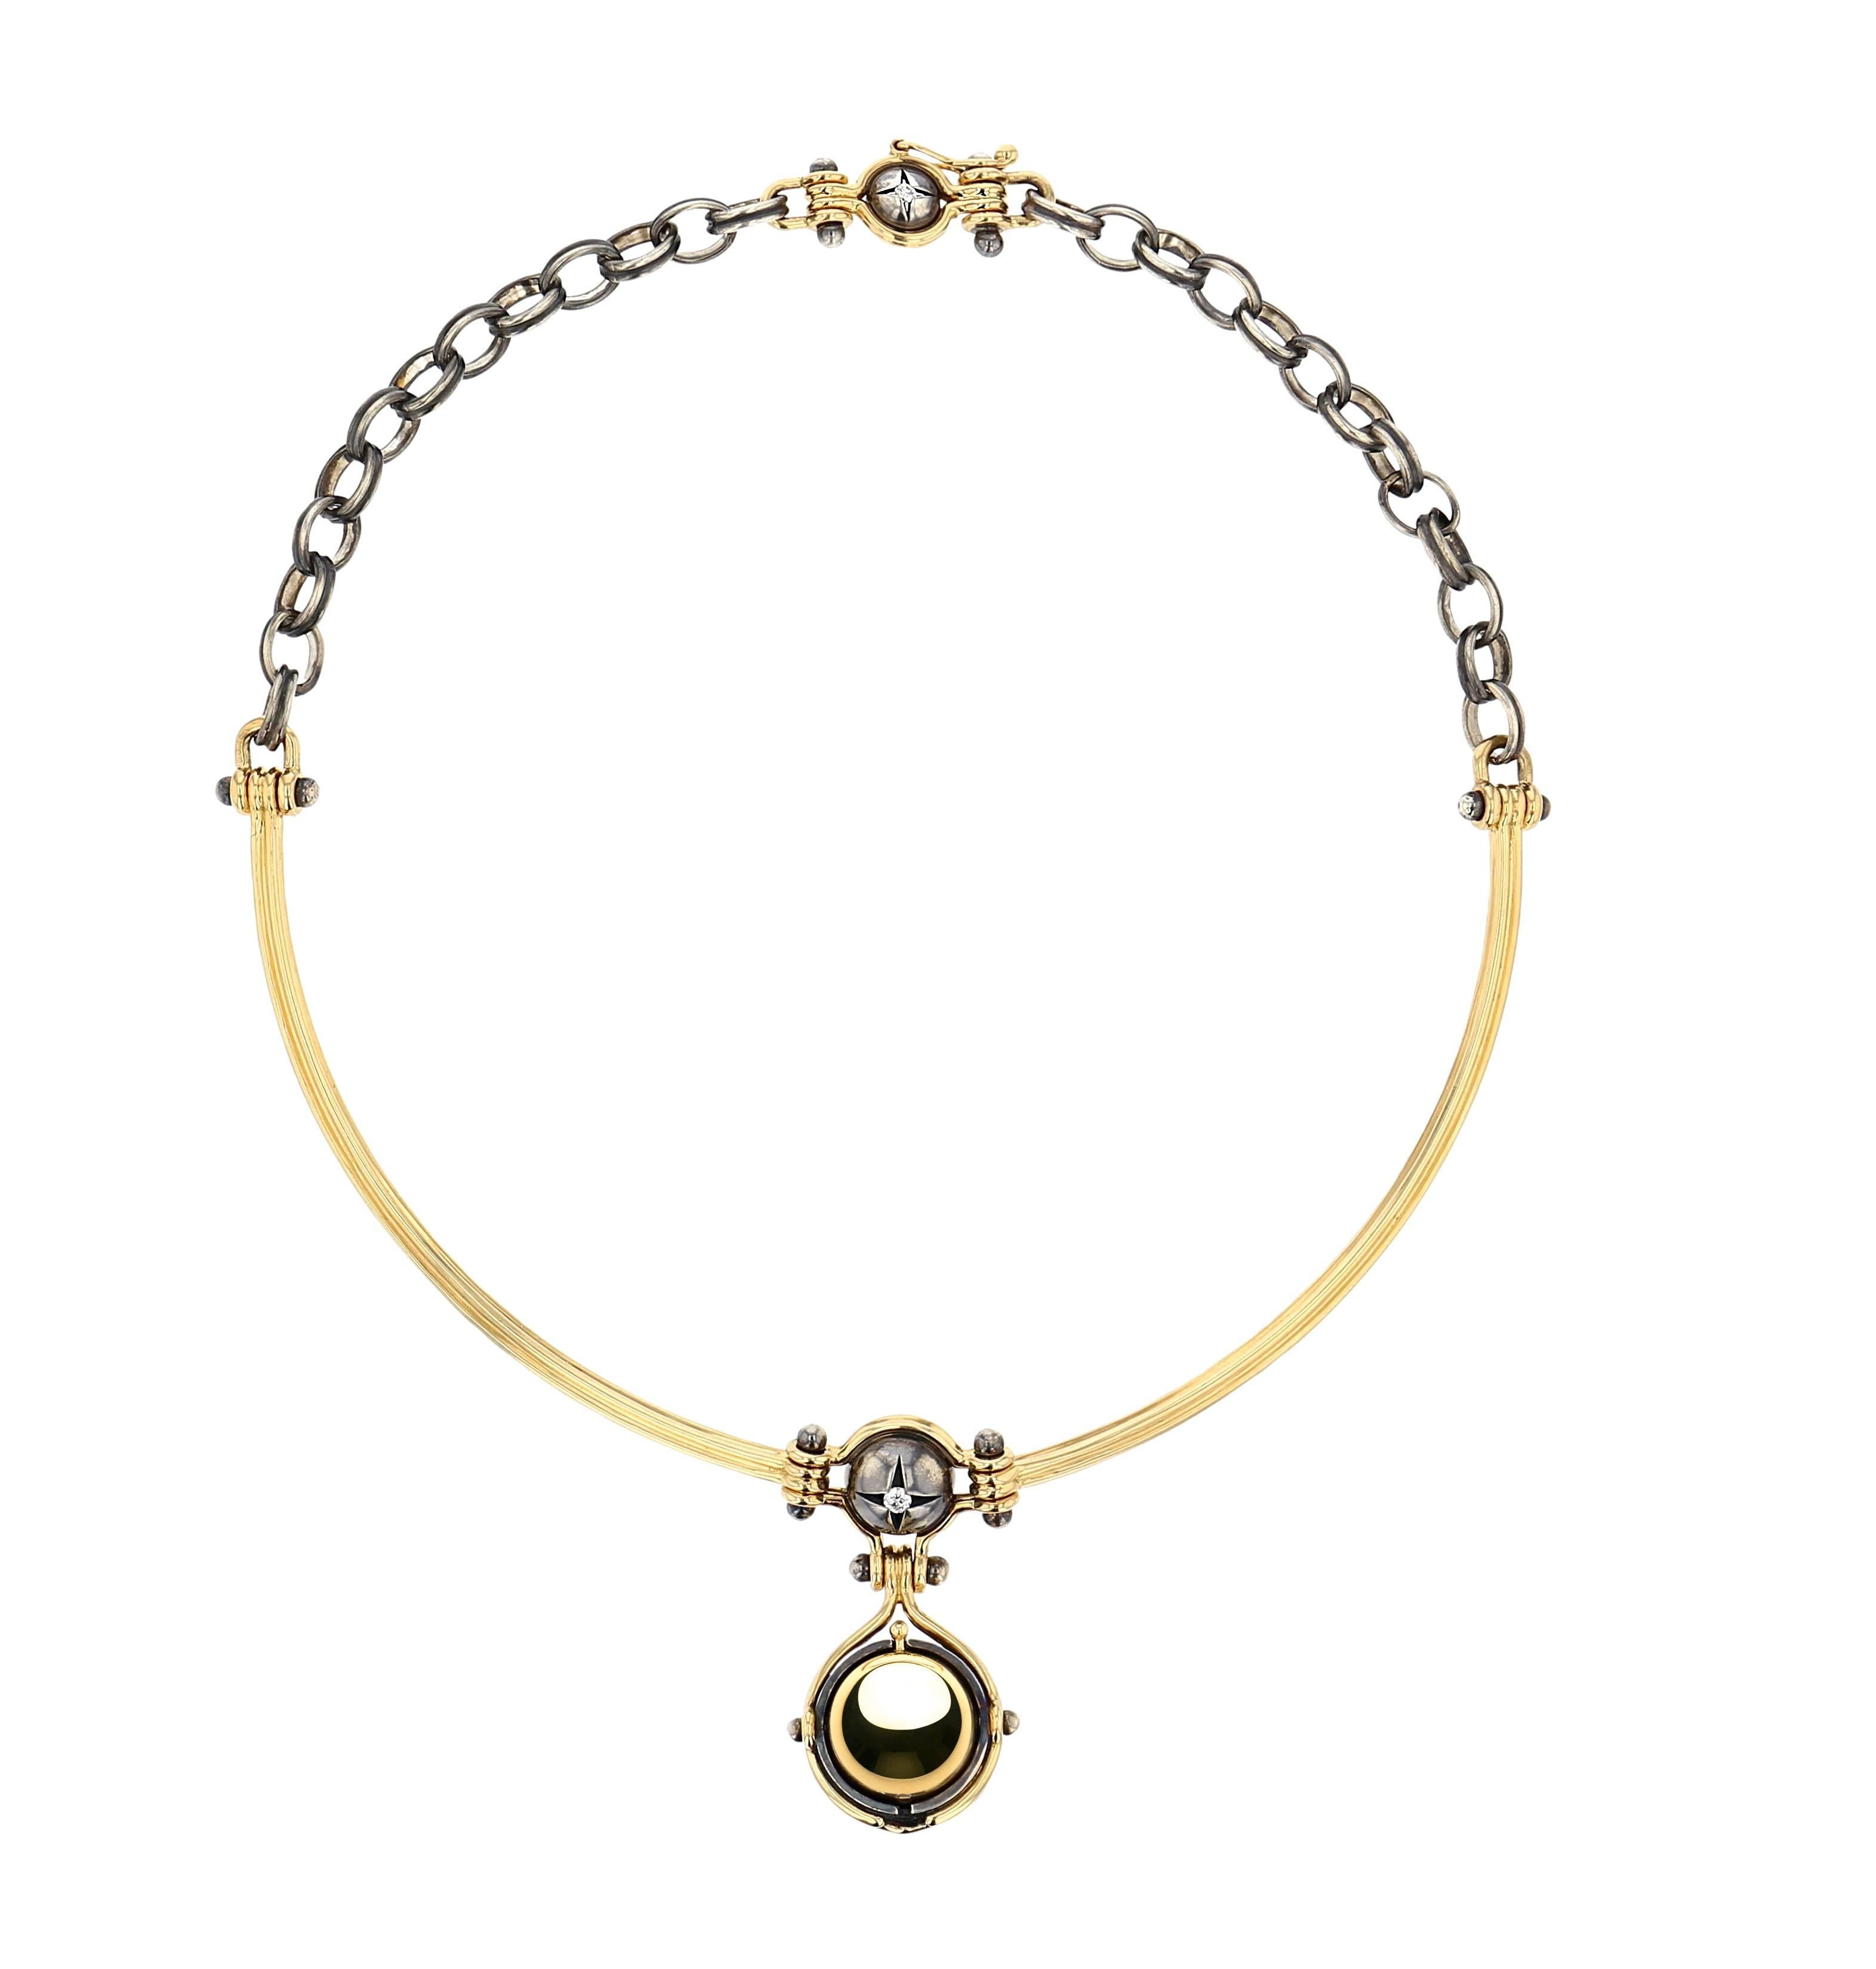 Elie Top Sirius Necklace Jonc Gold Péridot Diamonds : One of a Kind Piece !

Choker comprising a patinated silver chain, a yellow gold articulated bangle and a fastener featuring gold threads around a star with an inlaid diamond. A mobile yellow